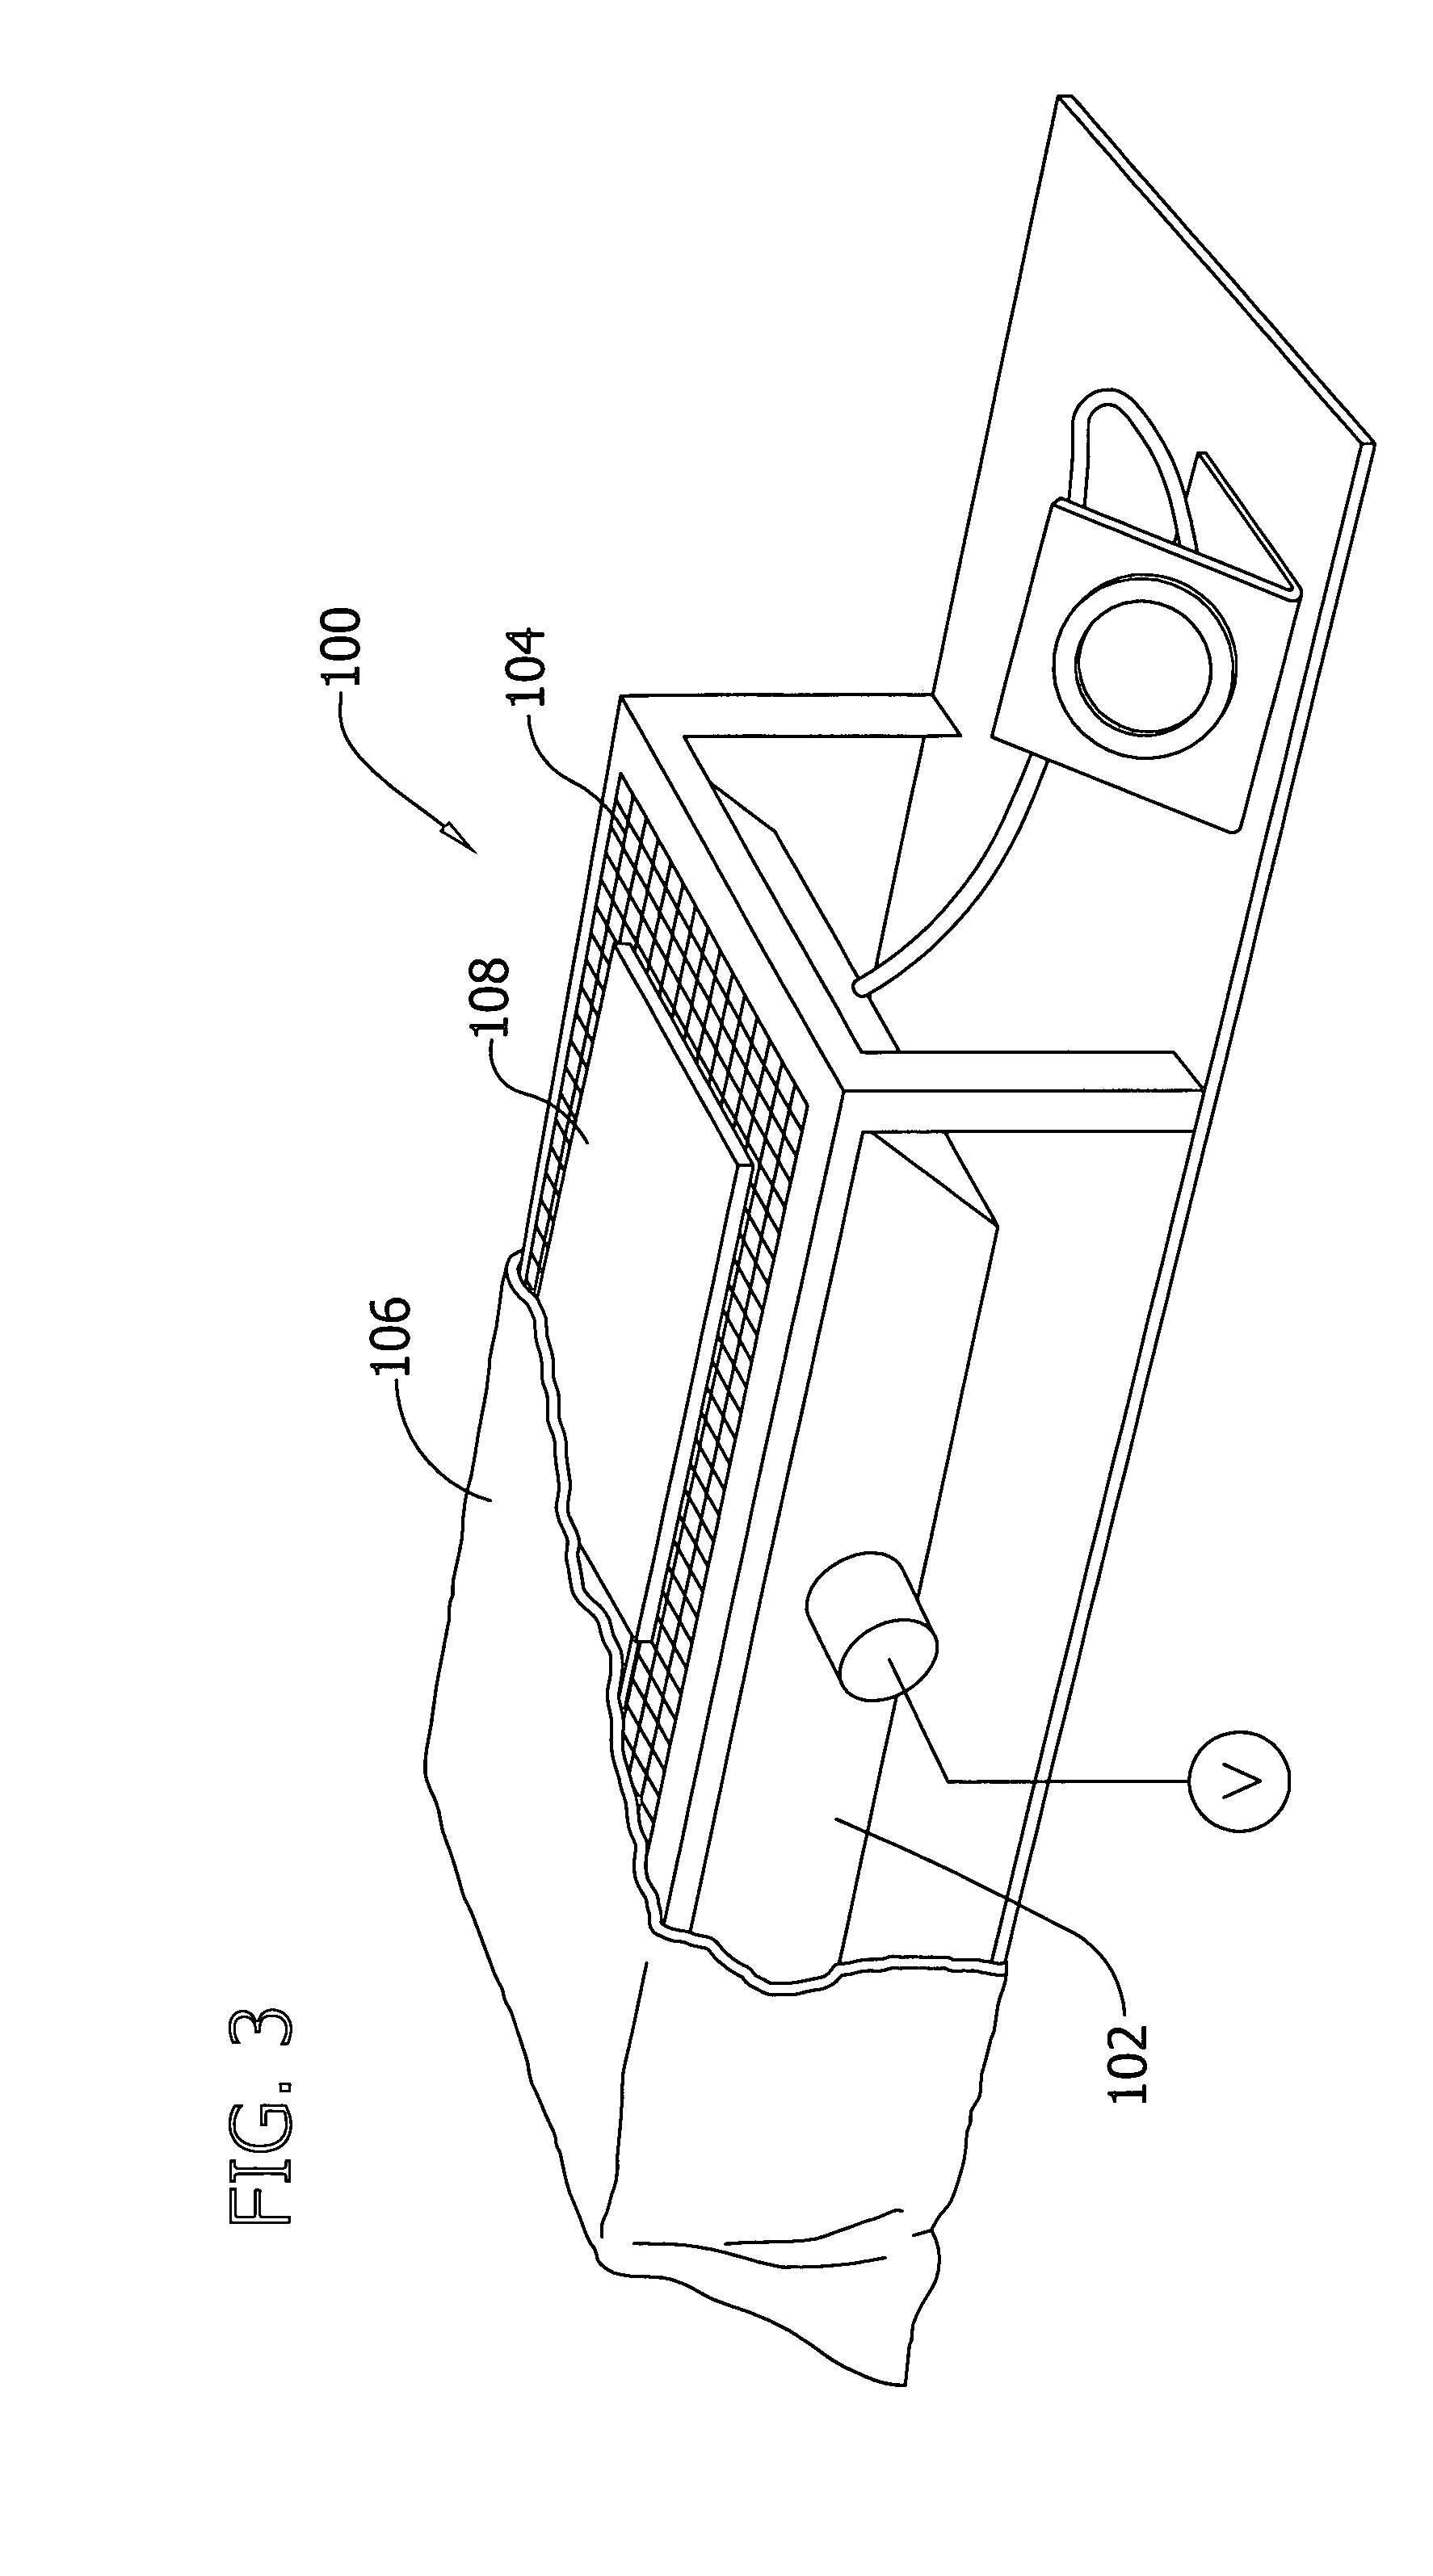 Absorbent structure having enhanced intake performance characteristics and method for evaluating such characteristics